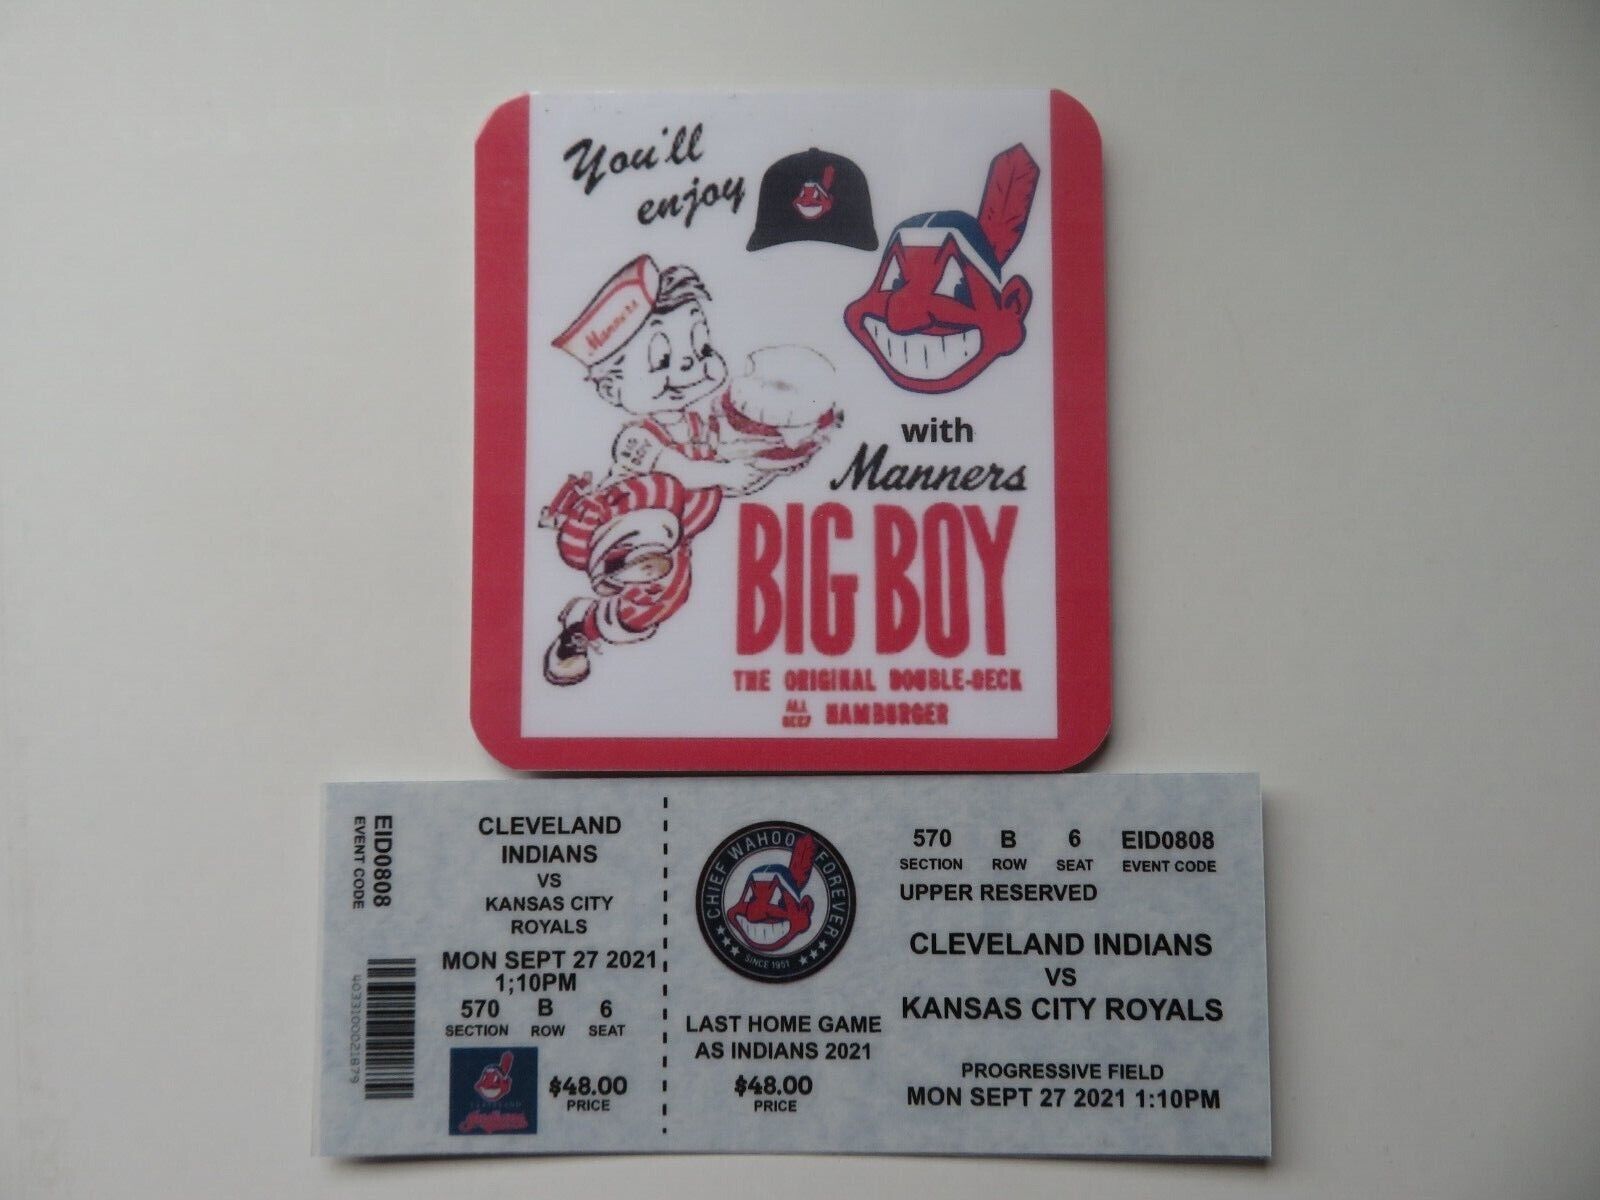 CLEVELAND INDIANS (CHEIF WAHOO) Wtth MANNERS BIG BOY Double-Deck Burger, MAGNET